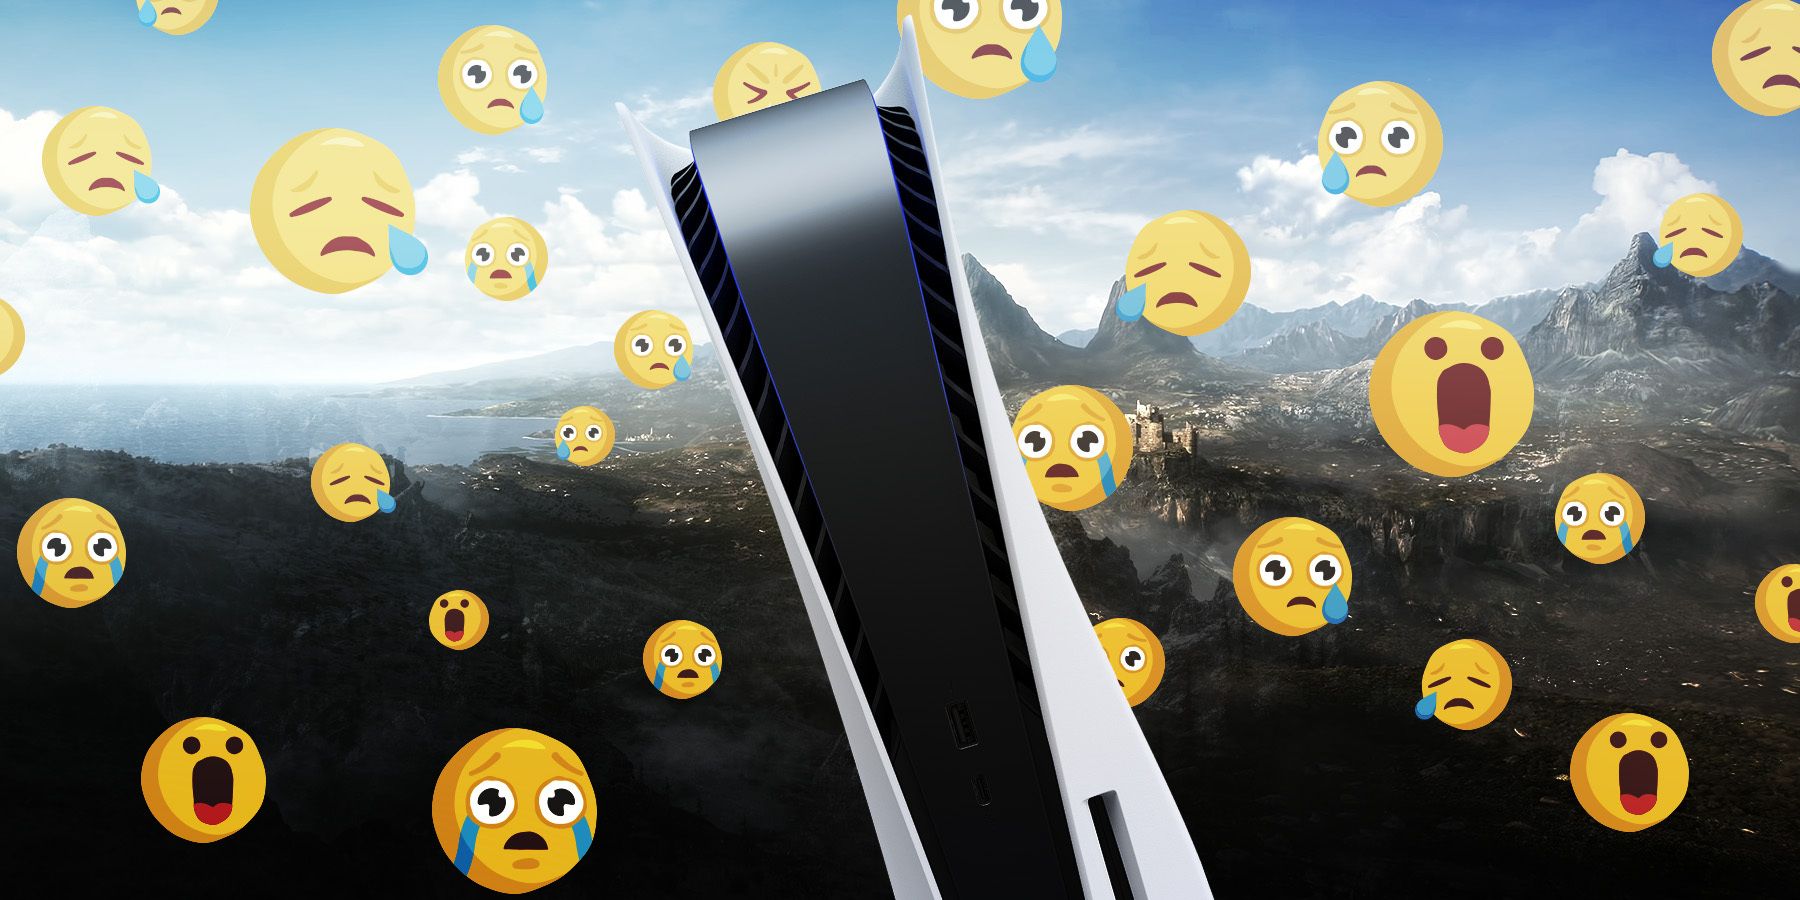 ps5 with crying emojis